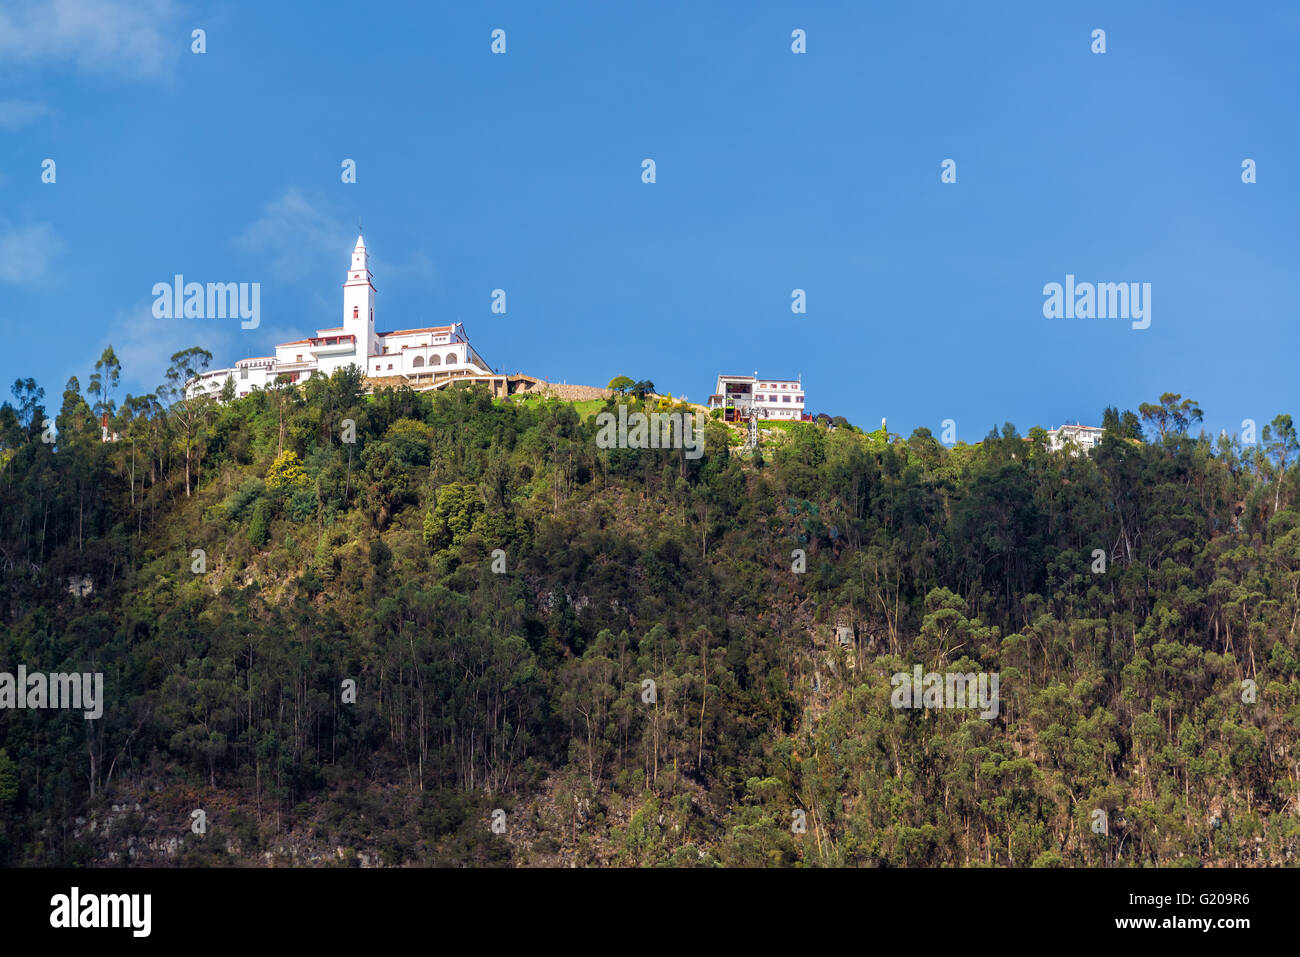 View of Monserrate church high up in the Andes Mountains overlooking Bogota, Colombia Stock Photo